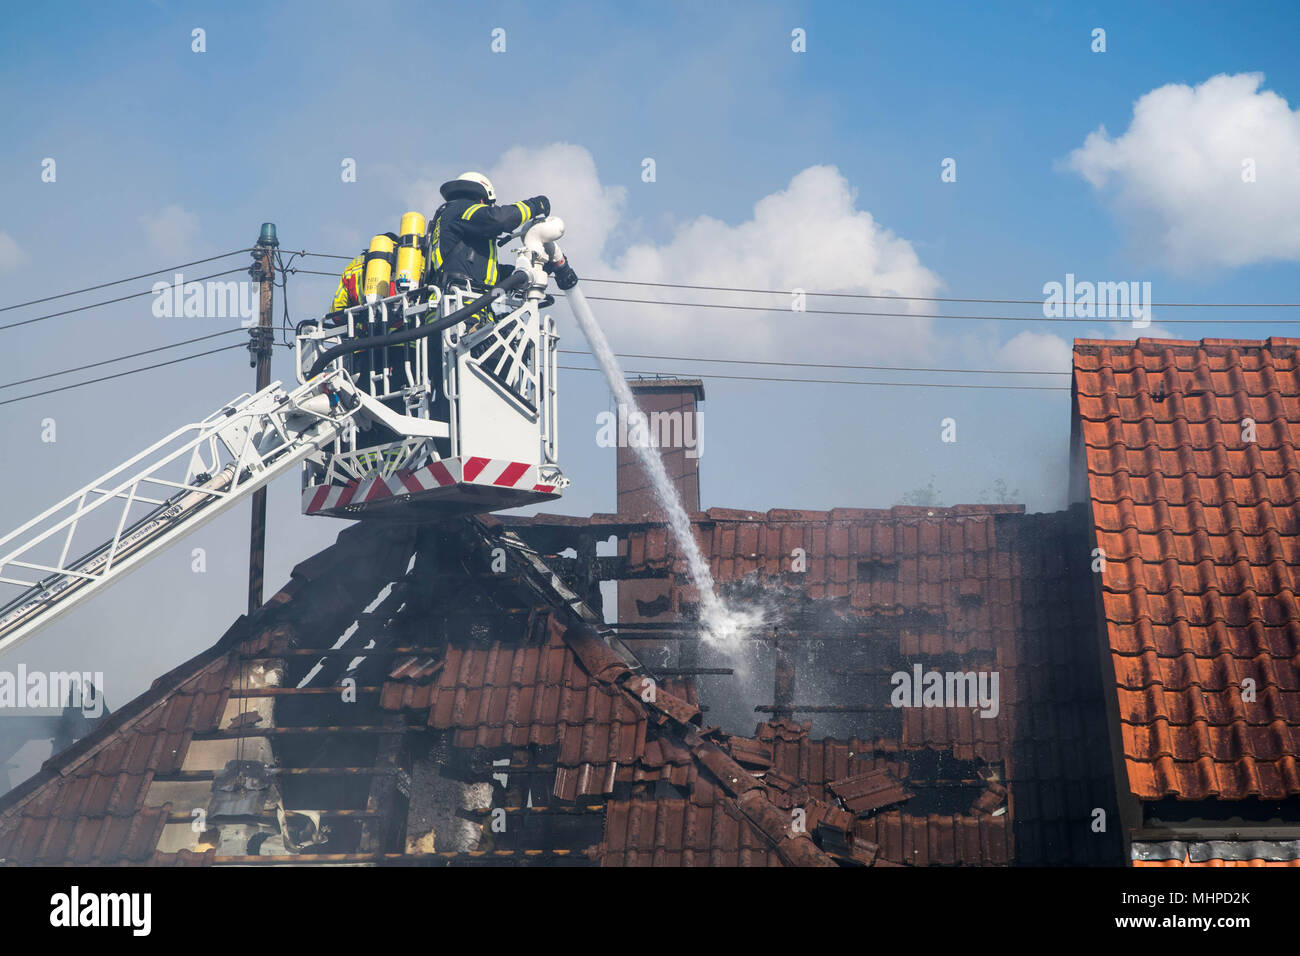 two Fireman with equipment on the Drehleiter ( aerial ladder ) extinguishing fire Stock Photo